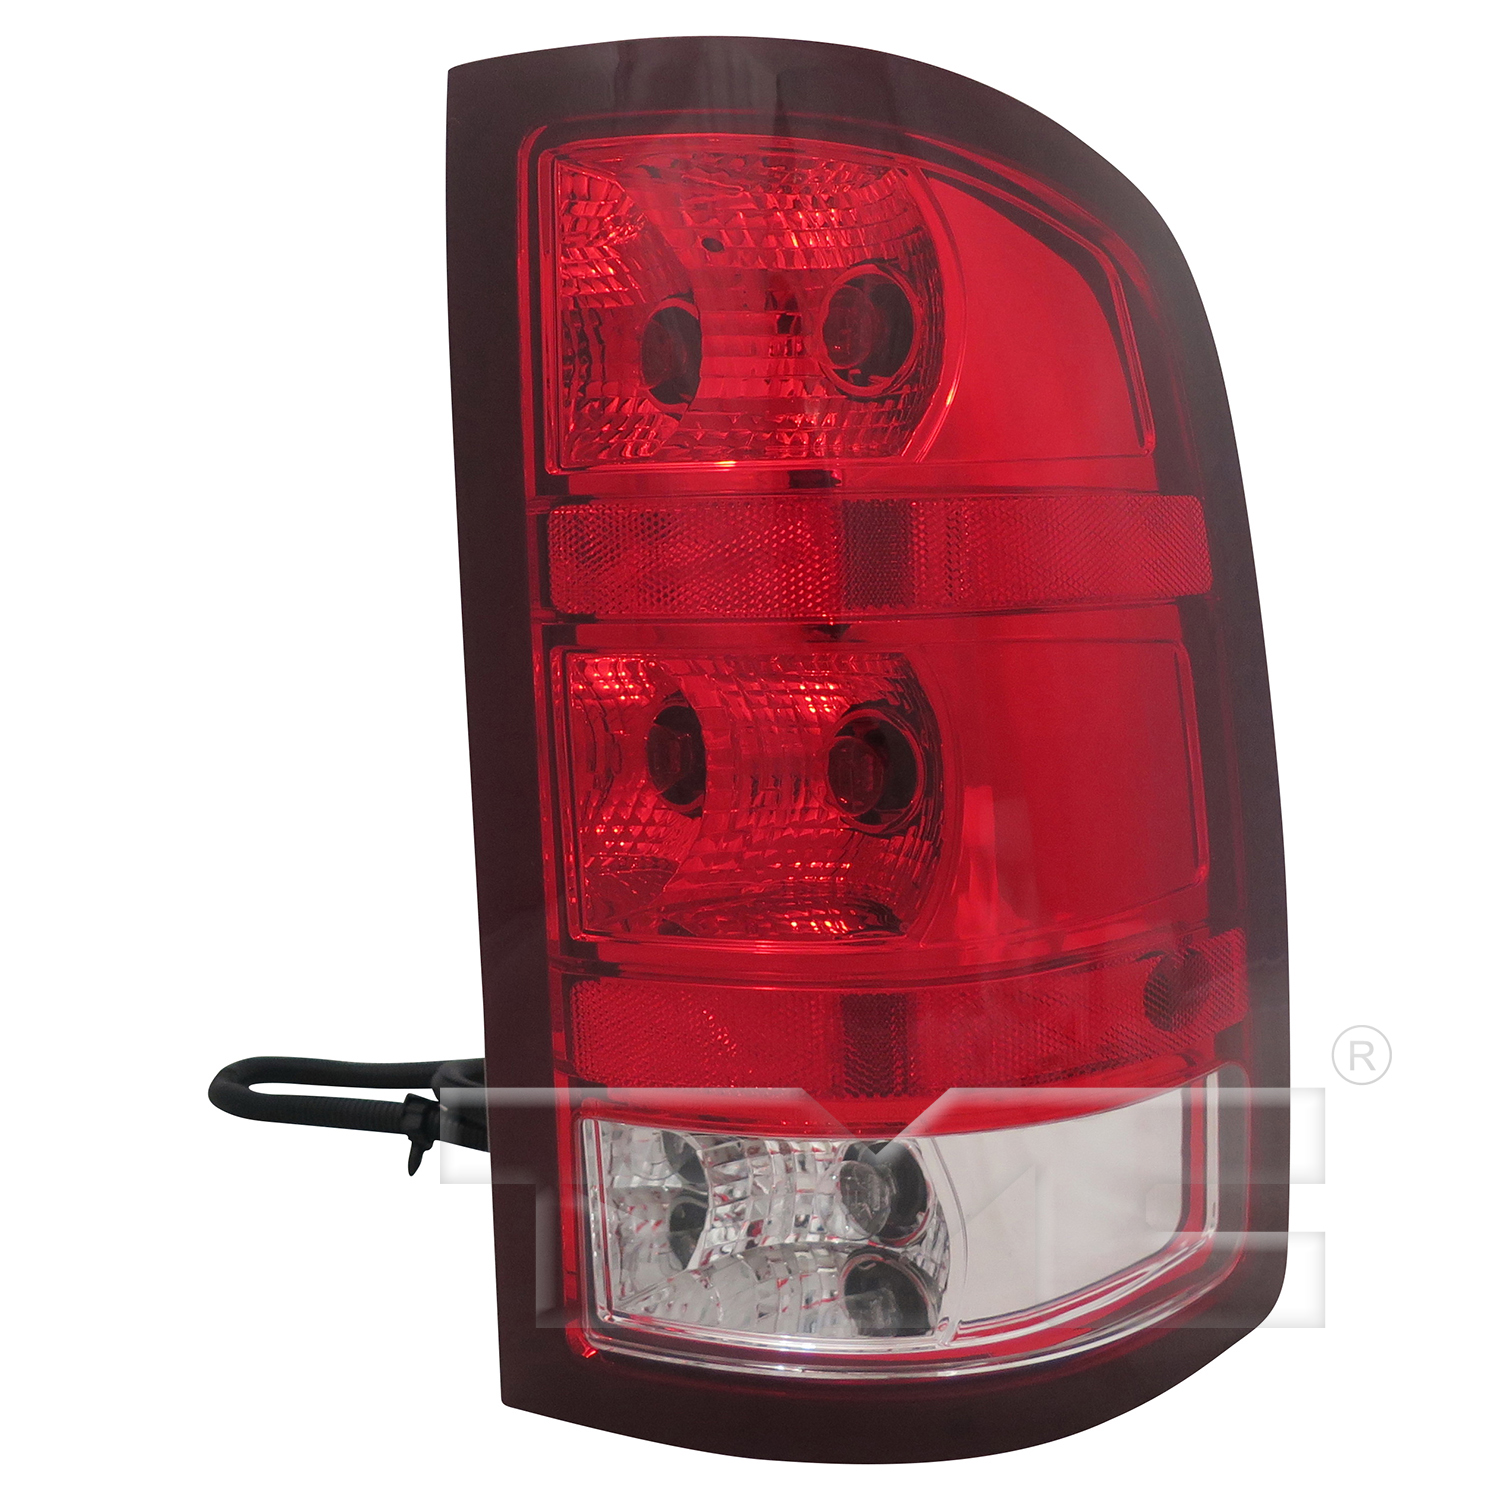 Aftermarket TAILLIGHTS for GMC - SIERRA 3500 HD, SIERRA 3500 HD,07-10,RT Taillamp assy